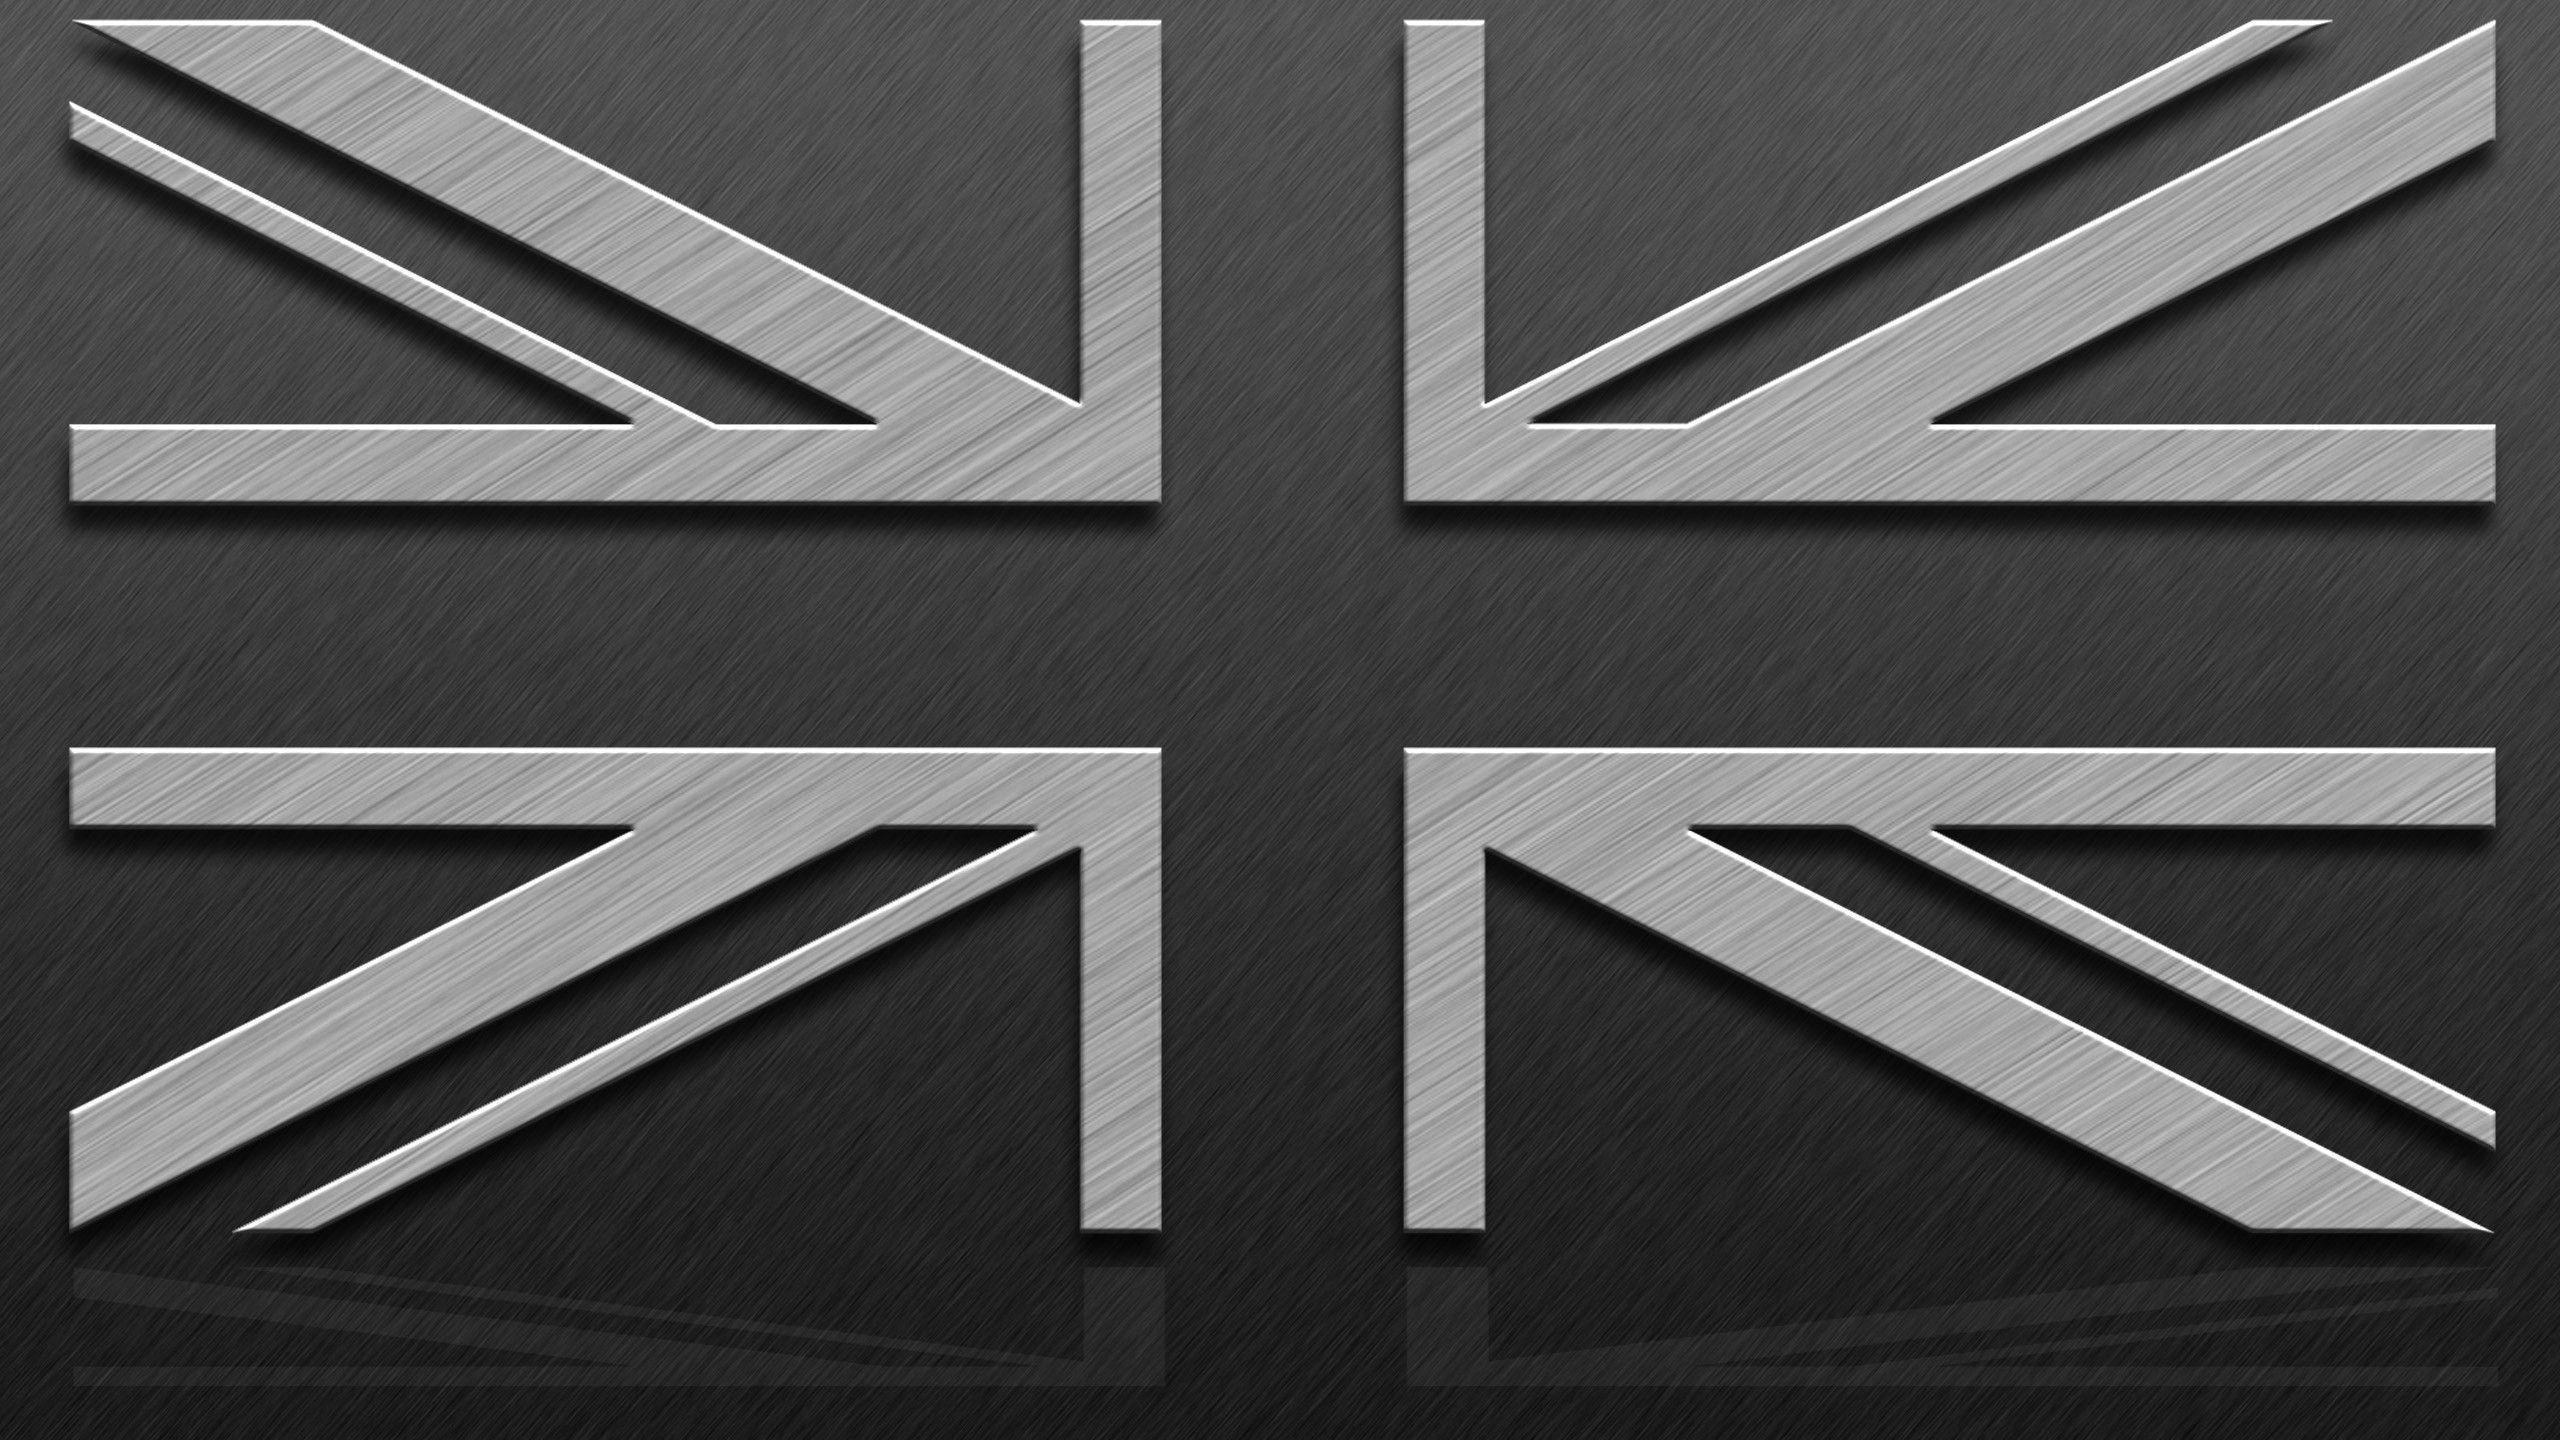 ceiling wallpaperunion jack wallpaper Search Engine